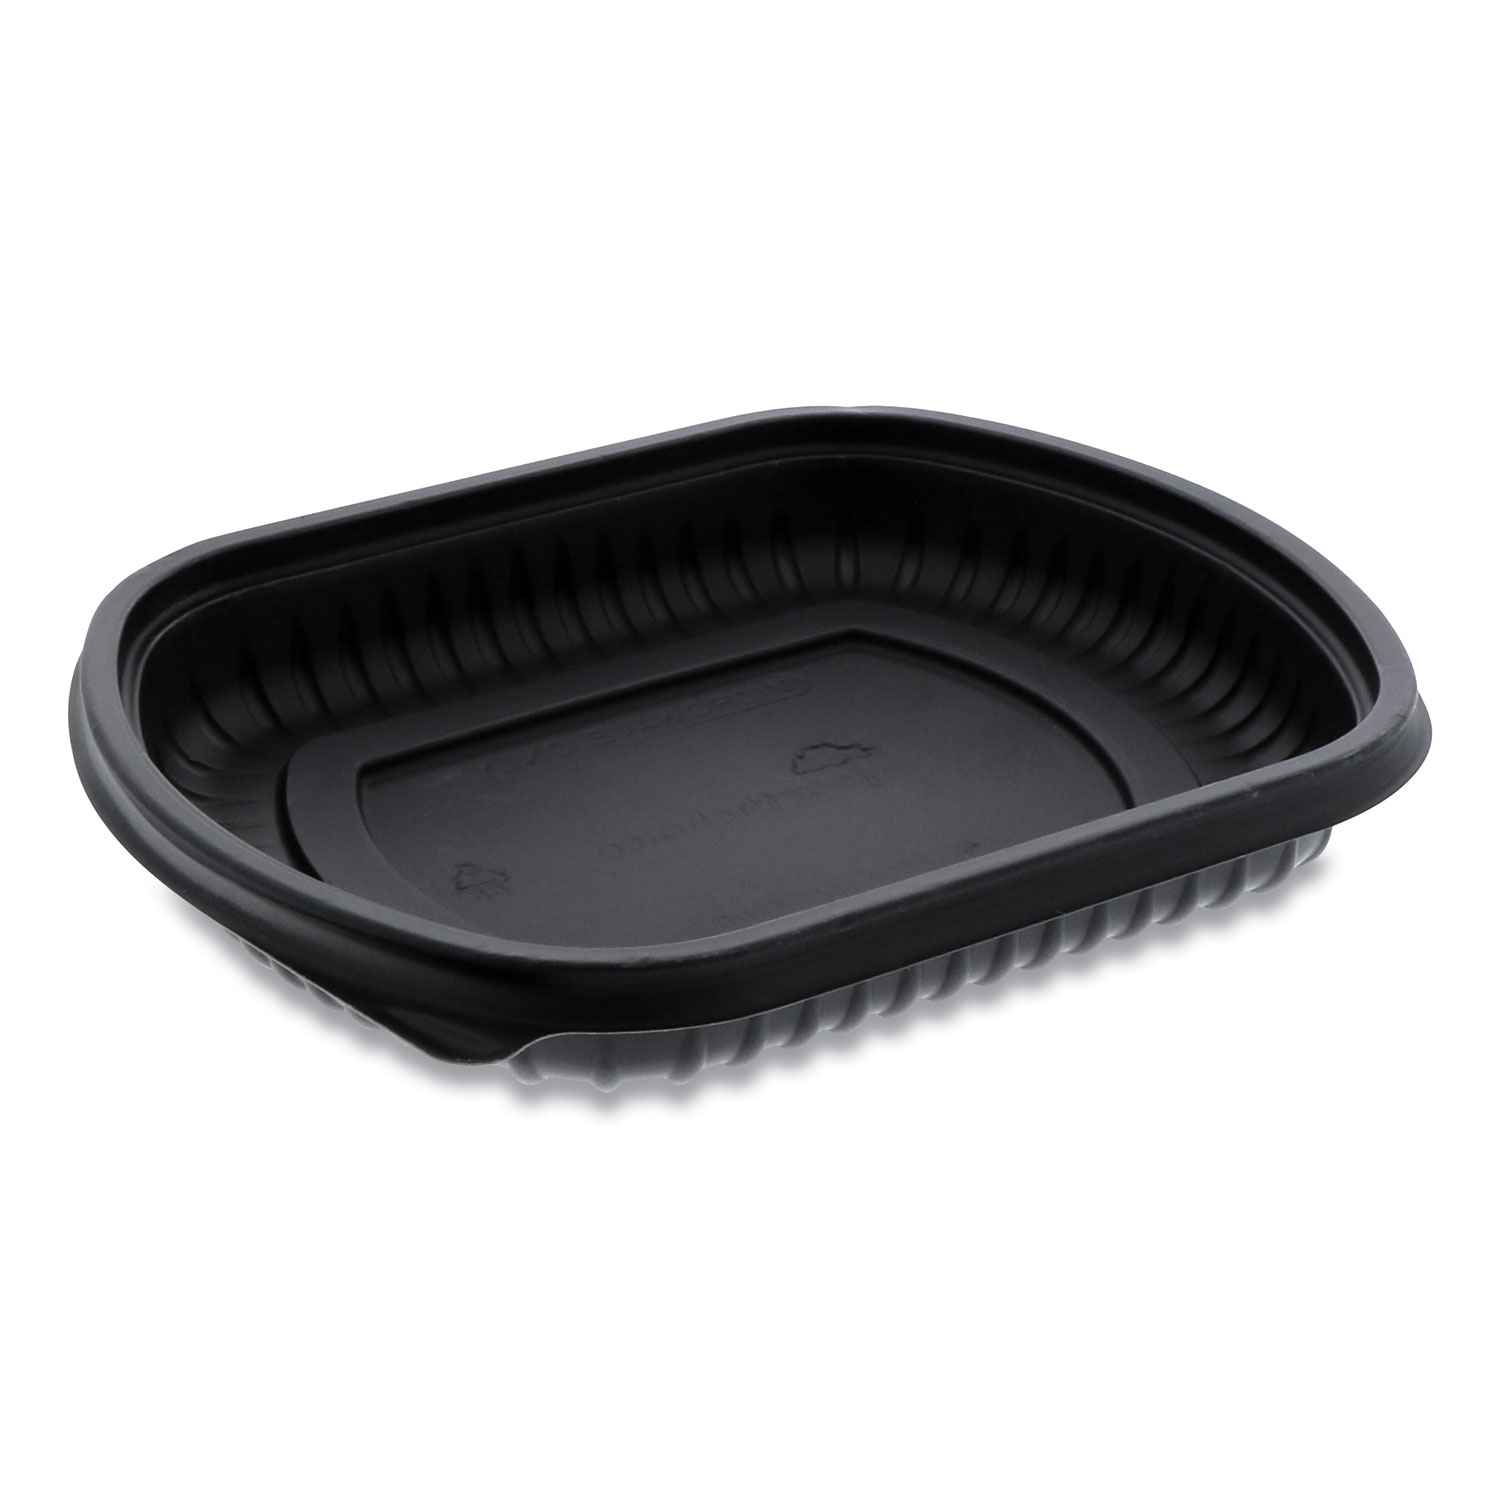  Pactiv 0CN846160000 EarthChoice ClearView MealMaster Container, 16 oz, 8.13 x 6.5 x 1, 1-Compartment, Black, 252/Carton (PCT0CN846160000) 